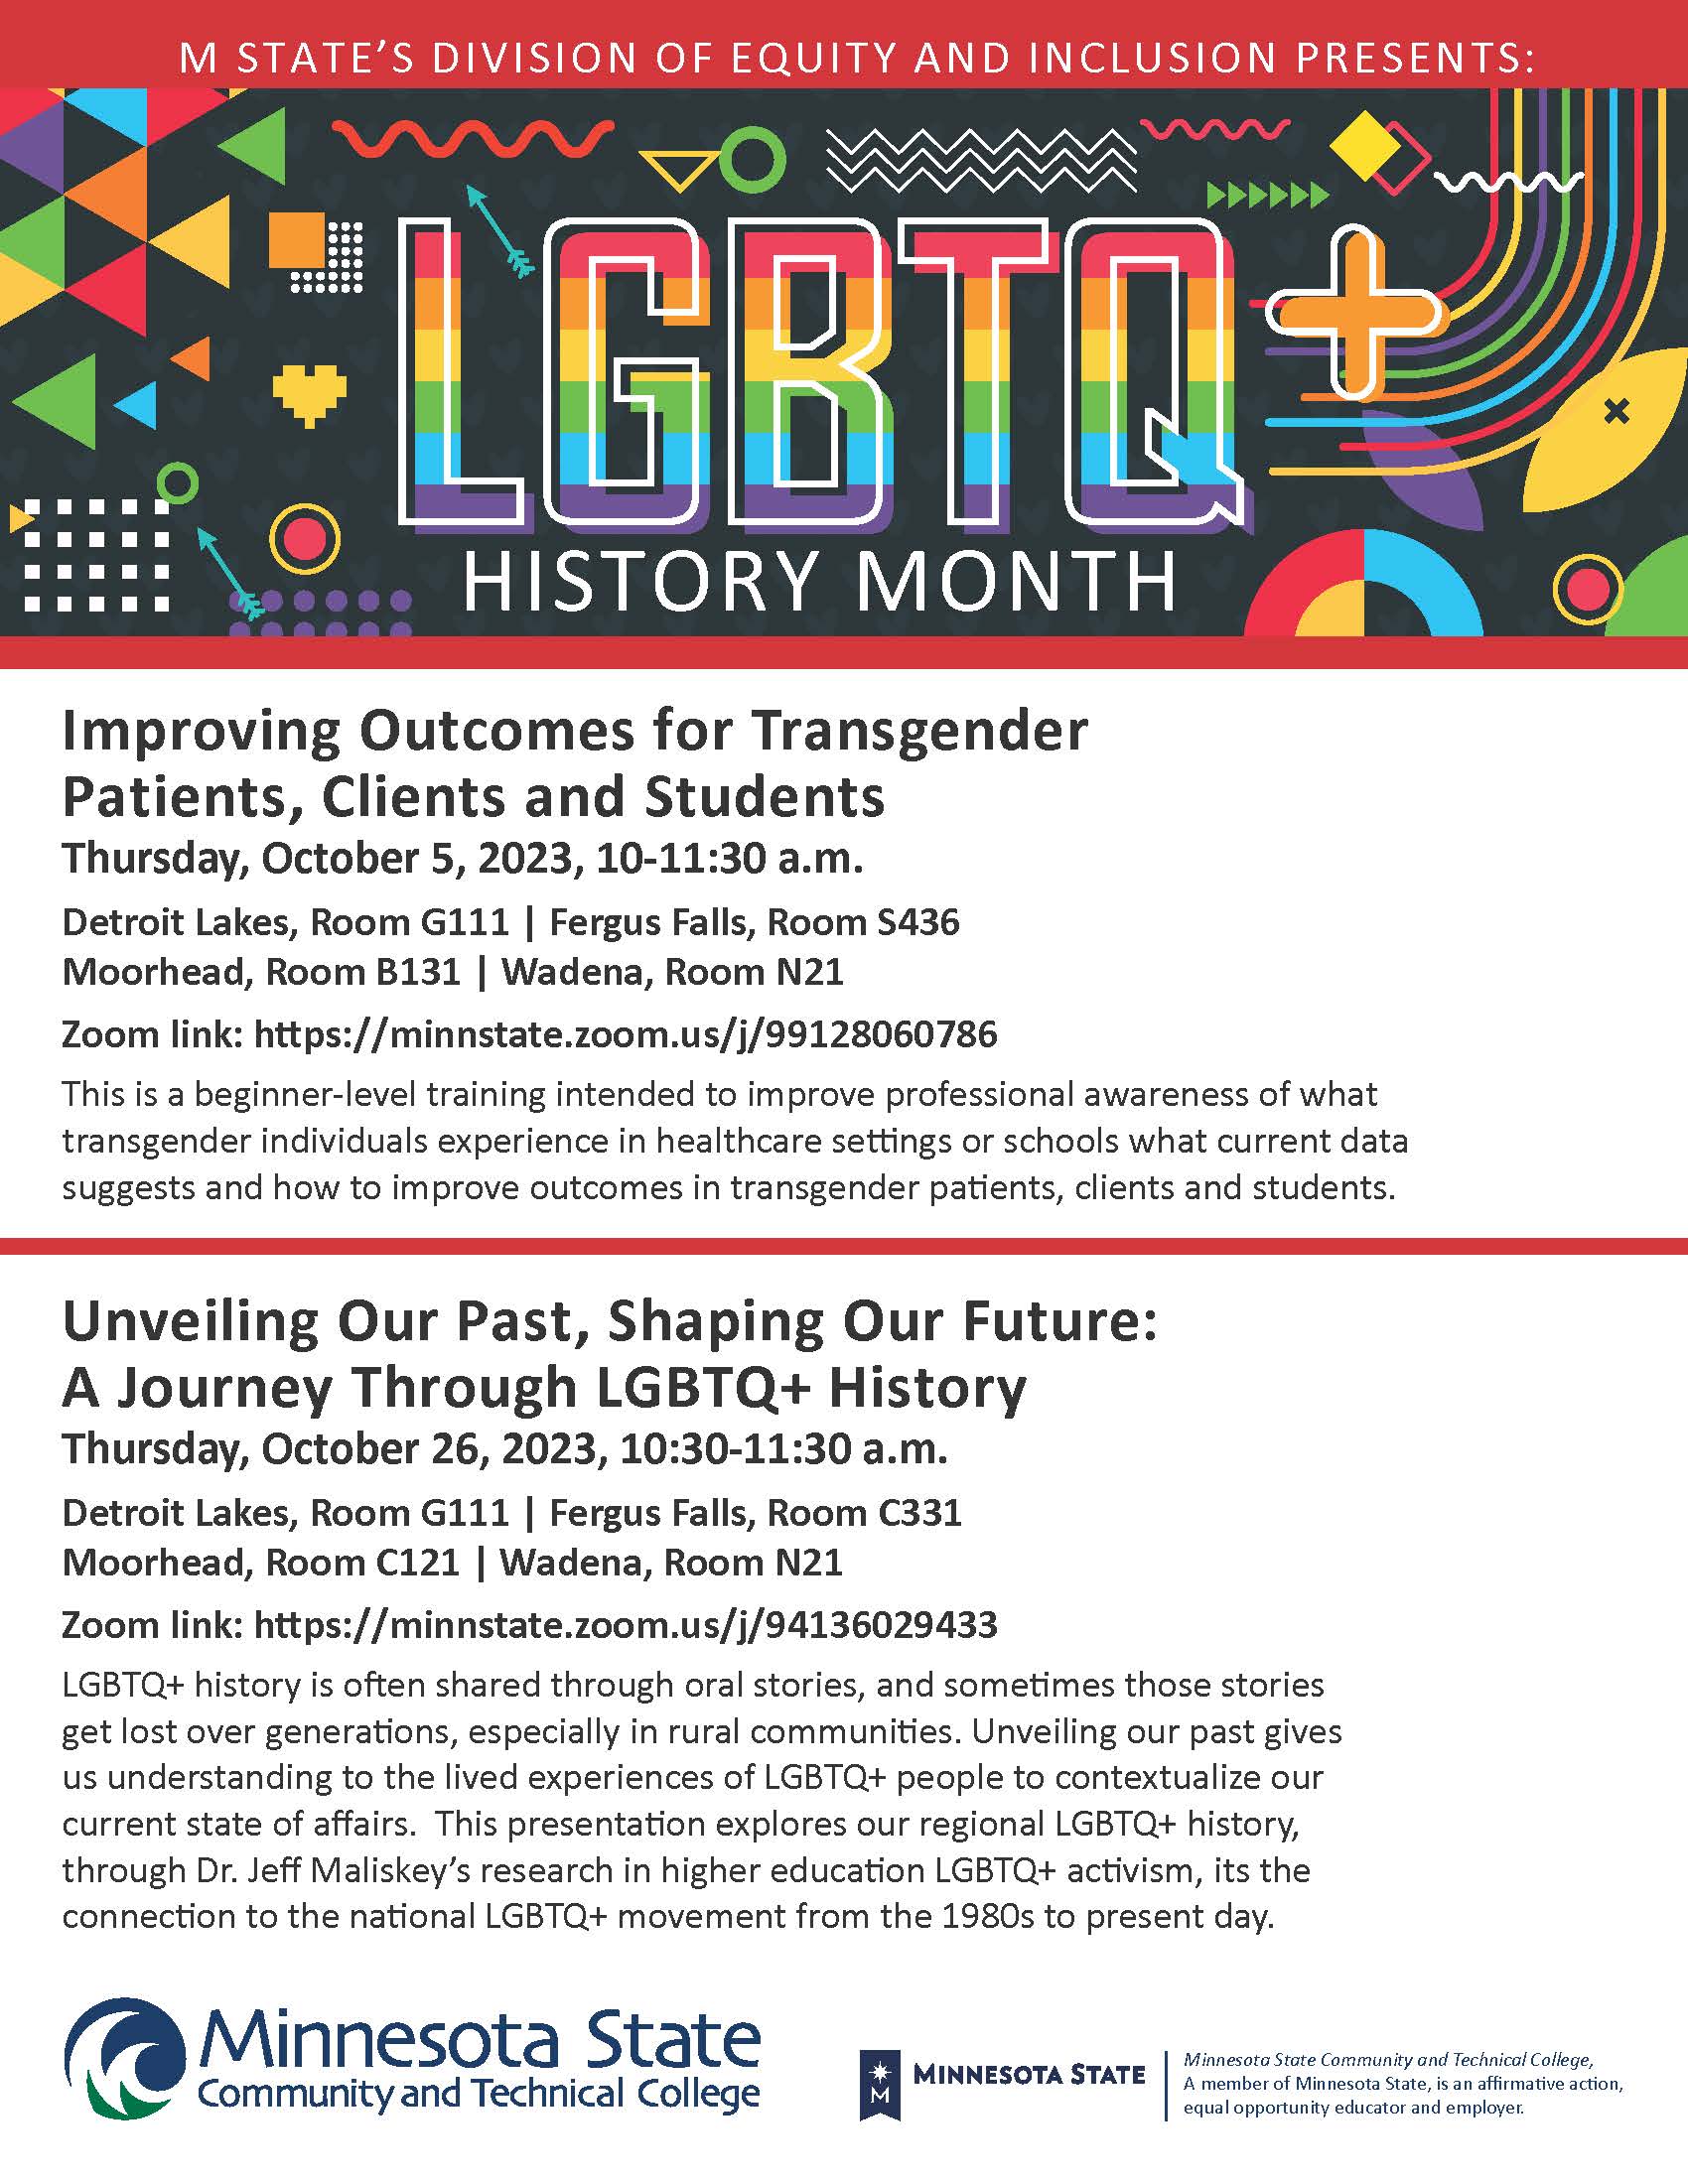 LGBTQ Flyer showing events for October 2023